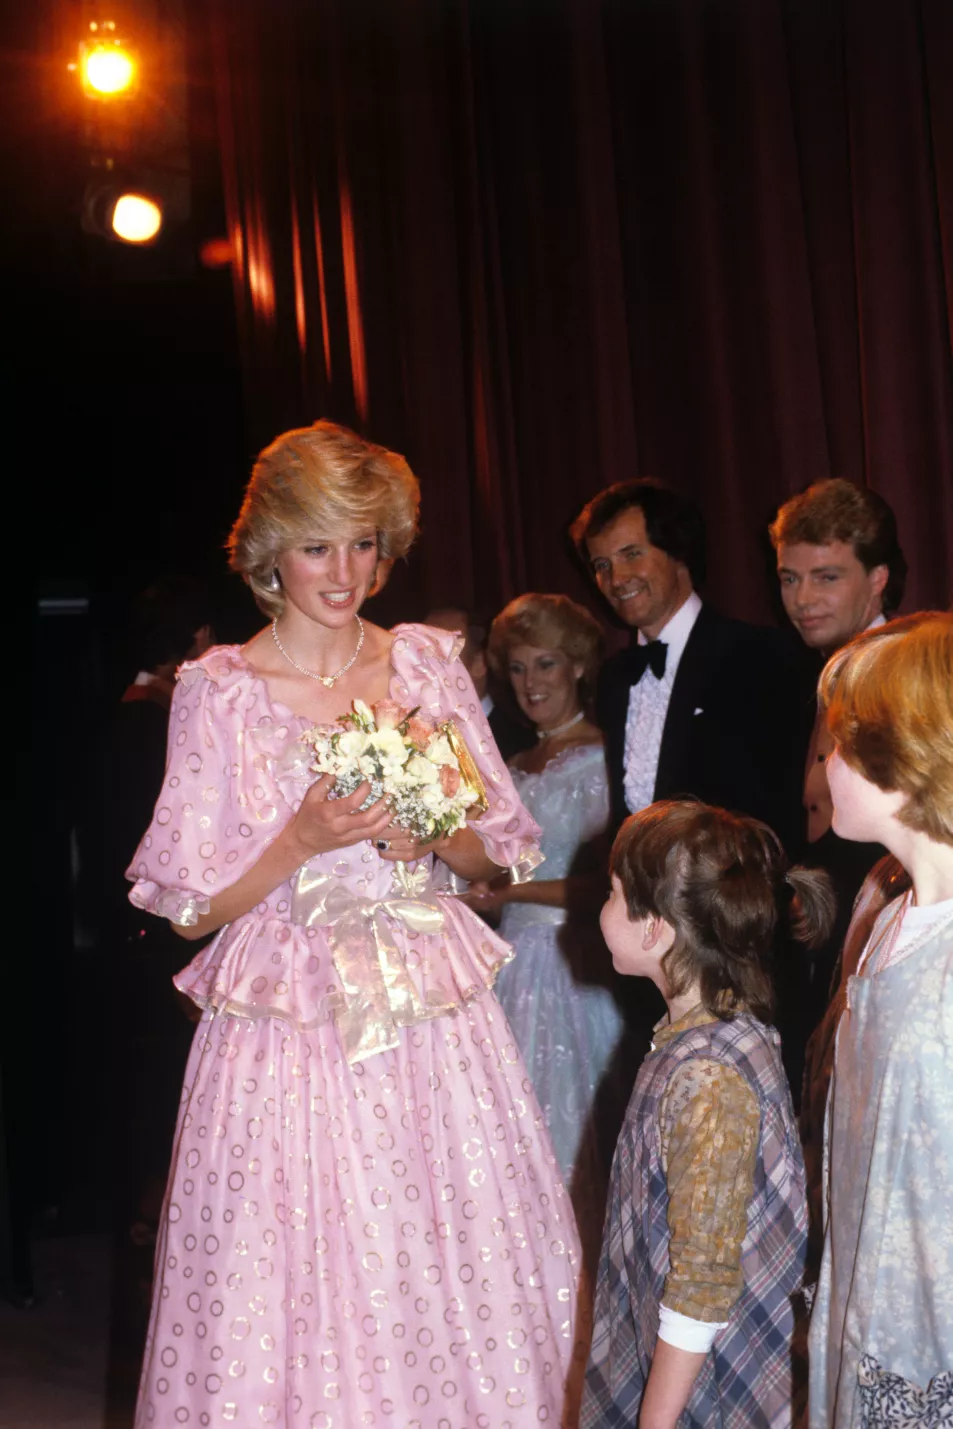 The Princess of Wales attending a Scottish Theatre Gala Variety Show at the Kings Theatre, Glasgow in 1983